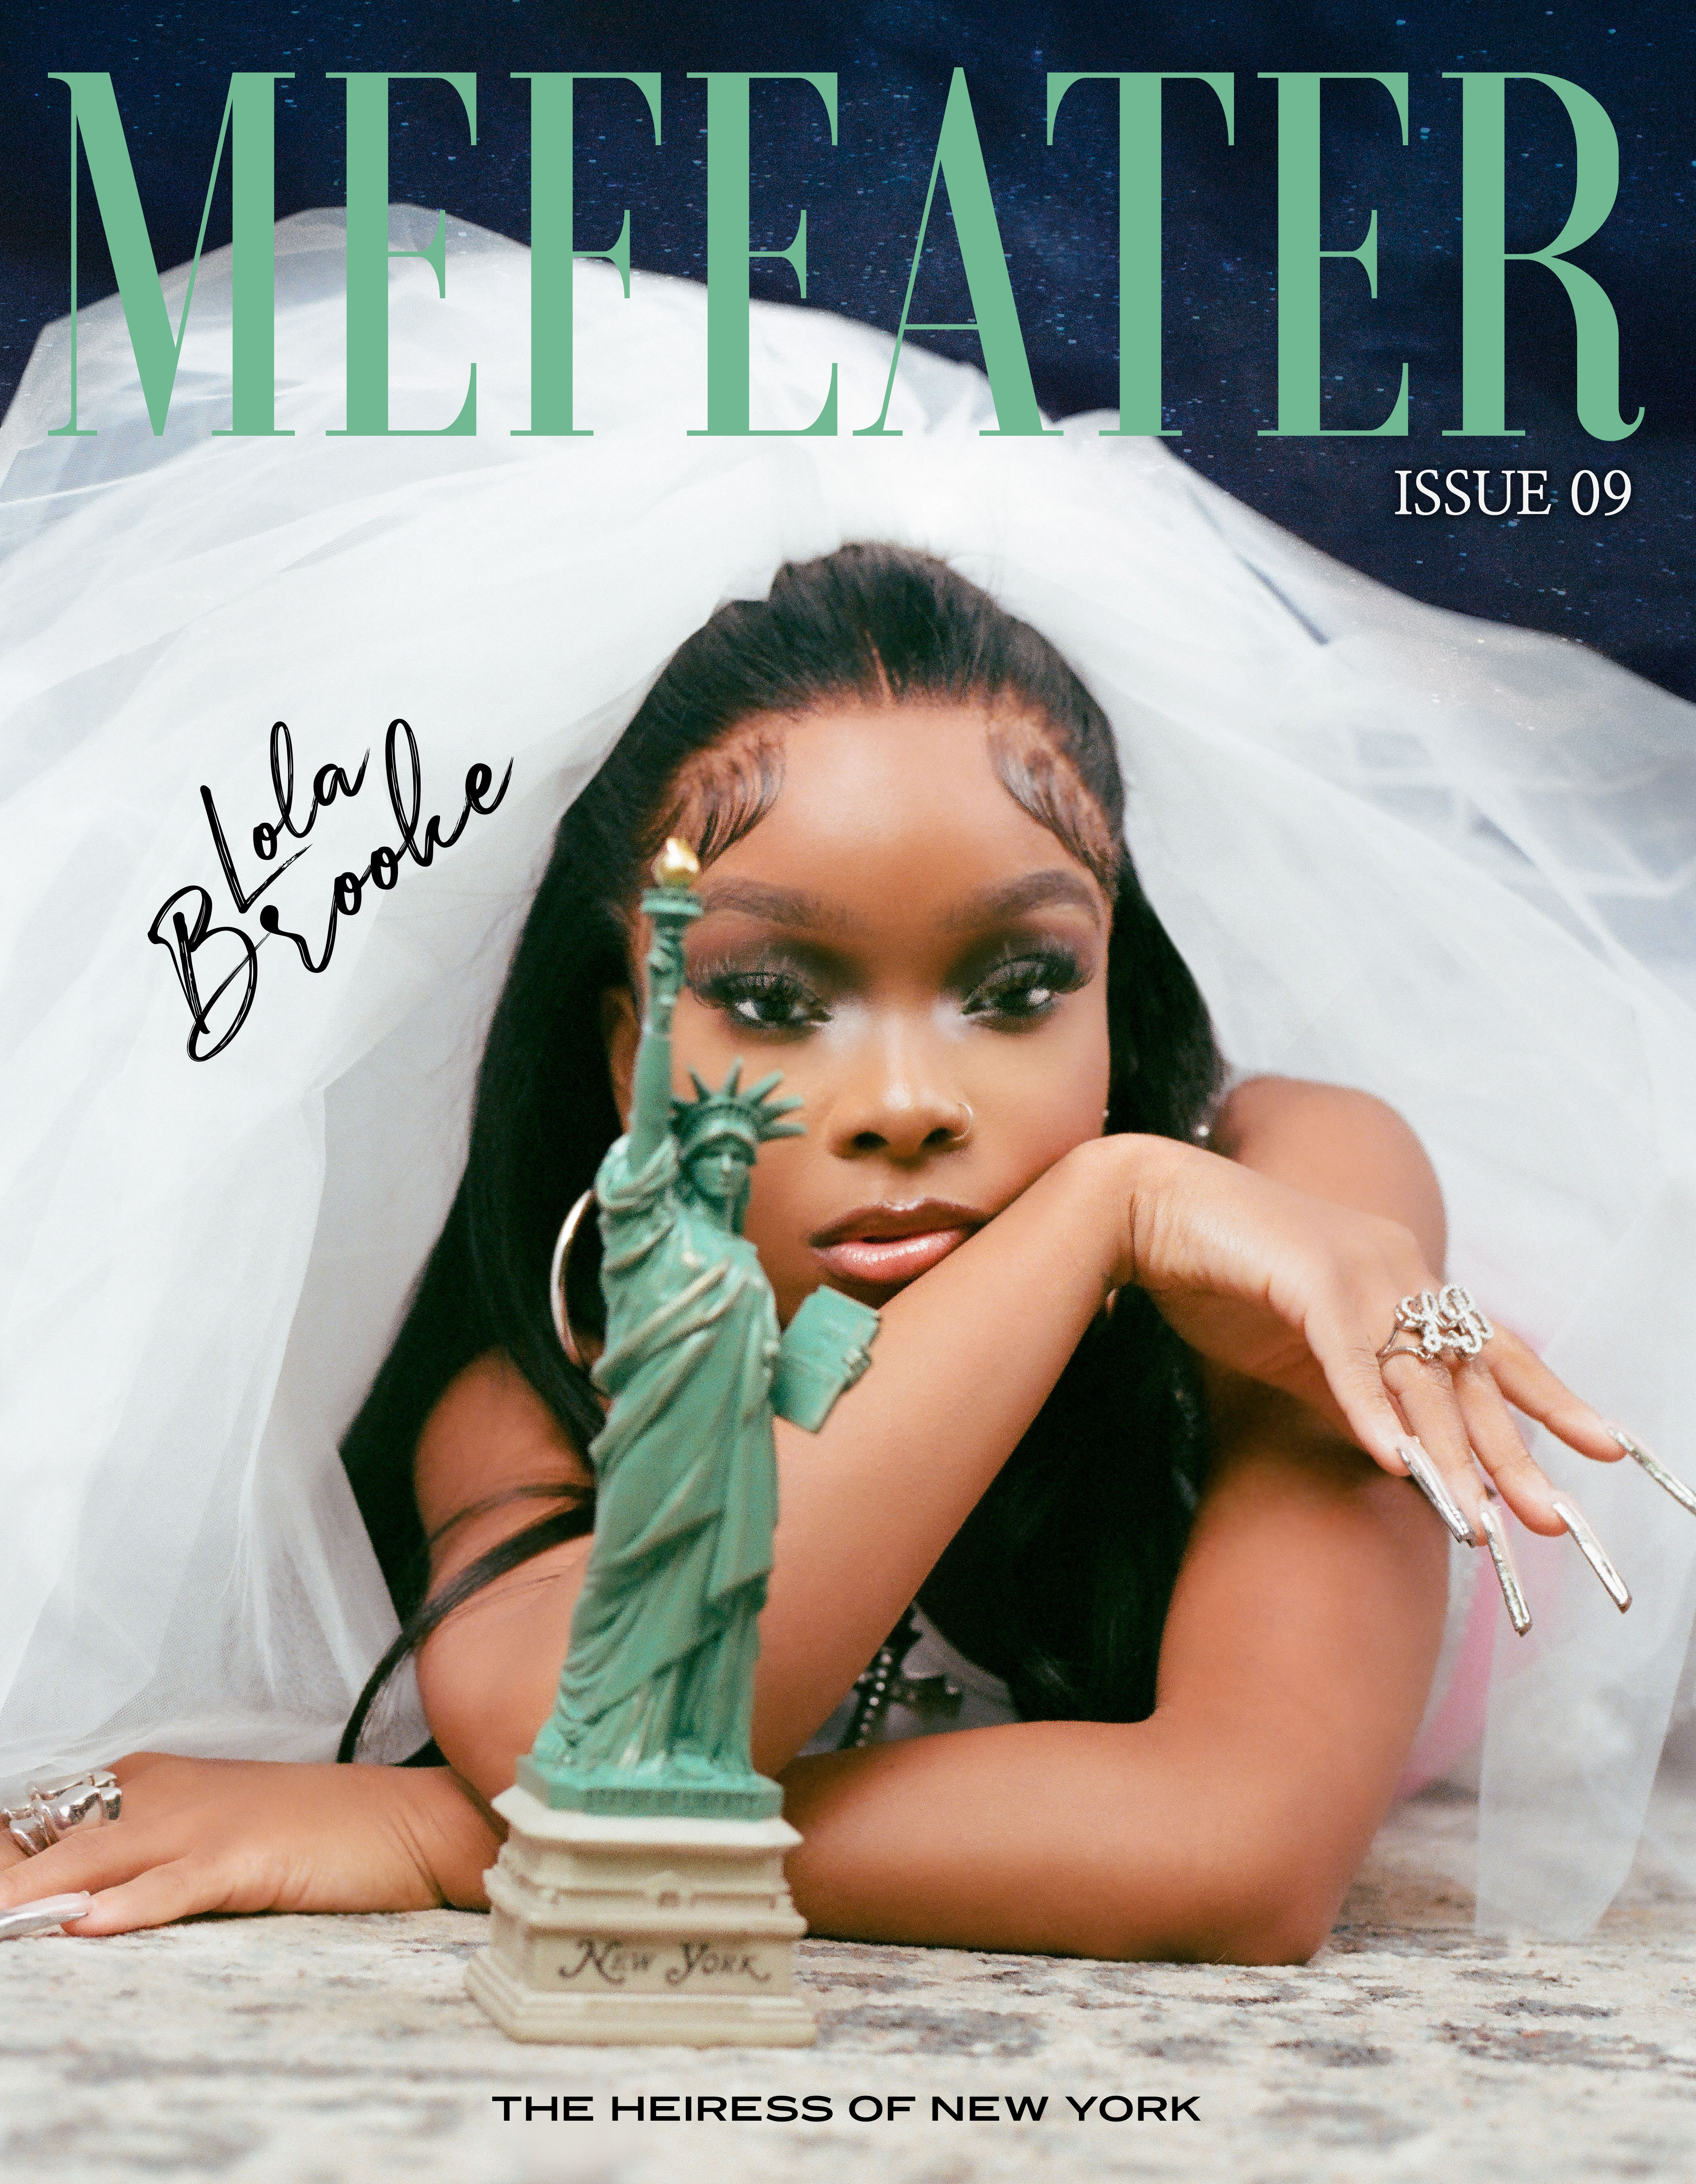 Lola Brooke MeFeater Magazine Cover Issue 09